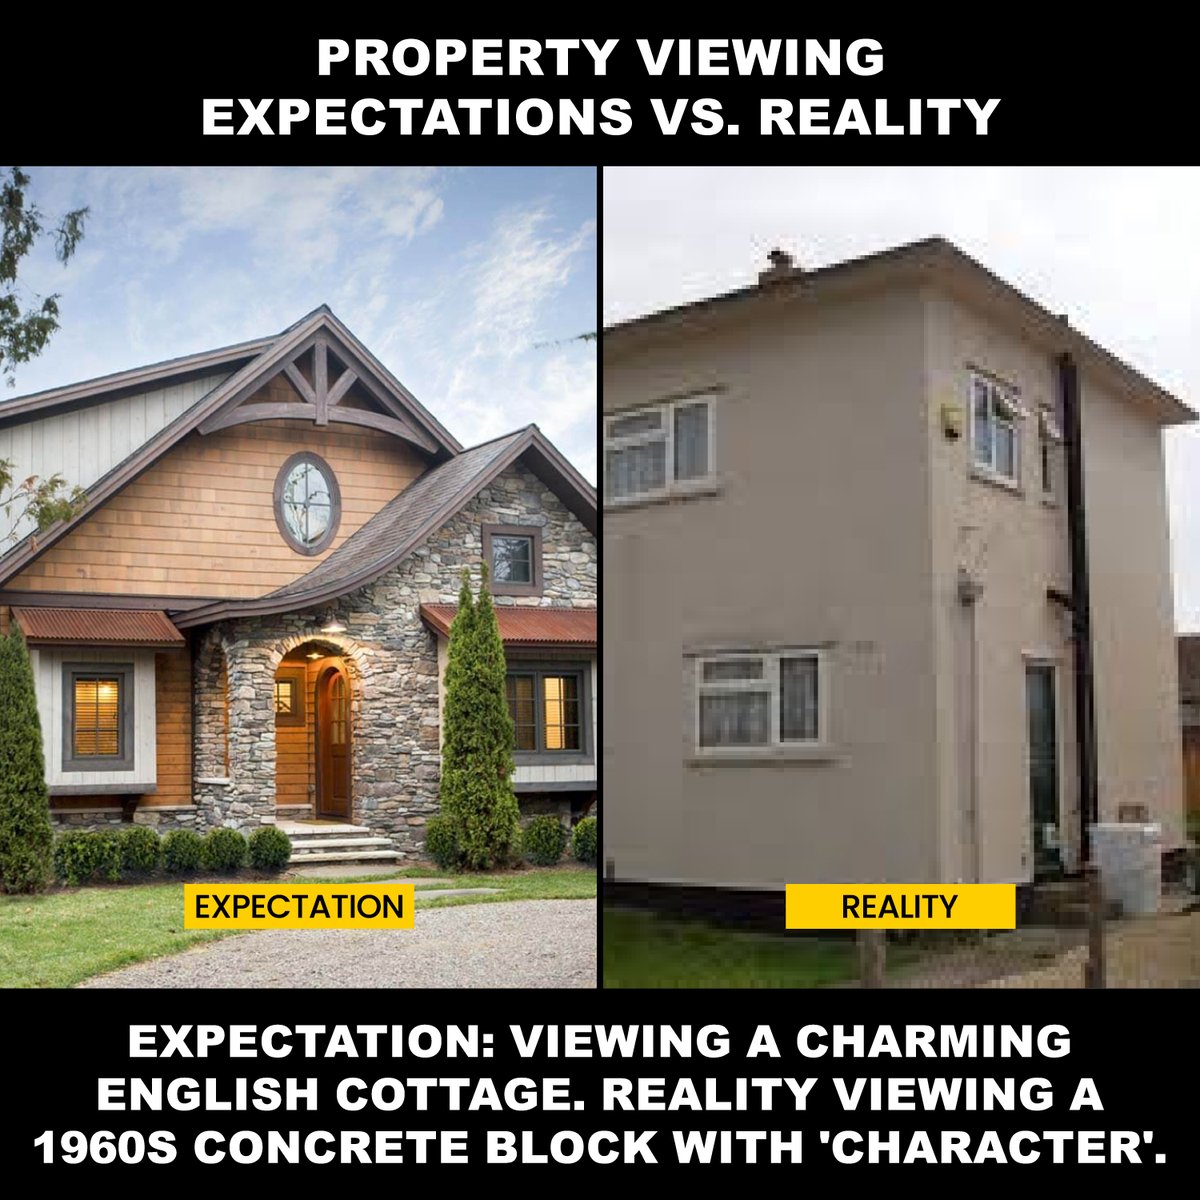 Property viewing: Expectation vs. reality! Dreaming of a charming English cottage? Sometimes reality surprises with a 1960s concrete block, but hey, it's got 'character'! 

🔗 estateagentsbeckton.co.uk/property-manag…

#PropertyReality #HomeBuyingJourney #EstateAgentsBeckton #propertymanagement